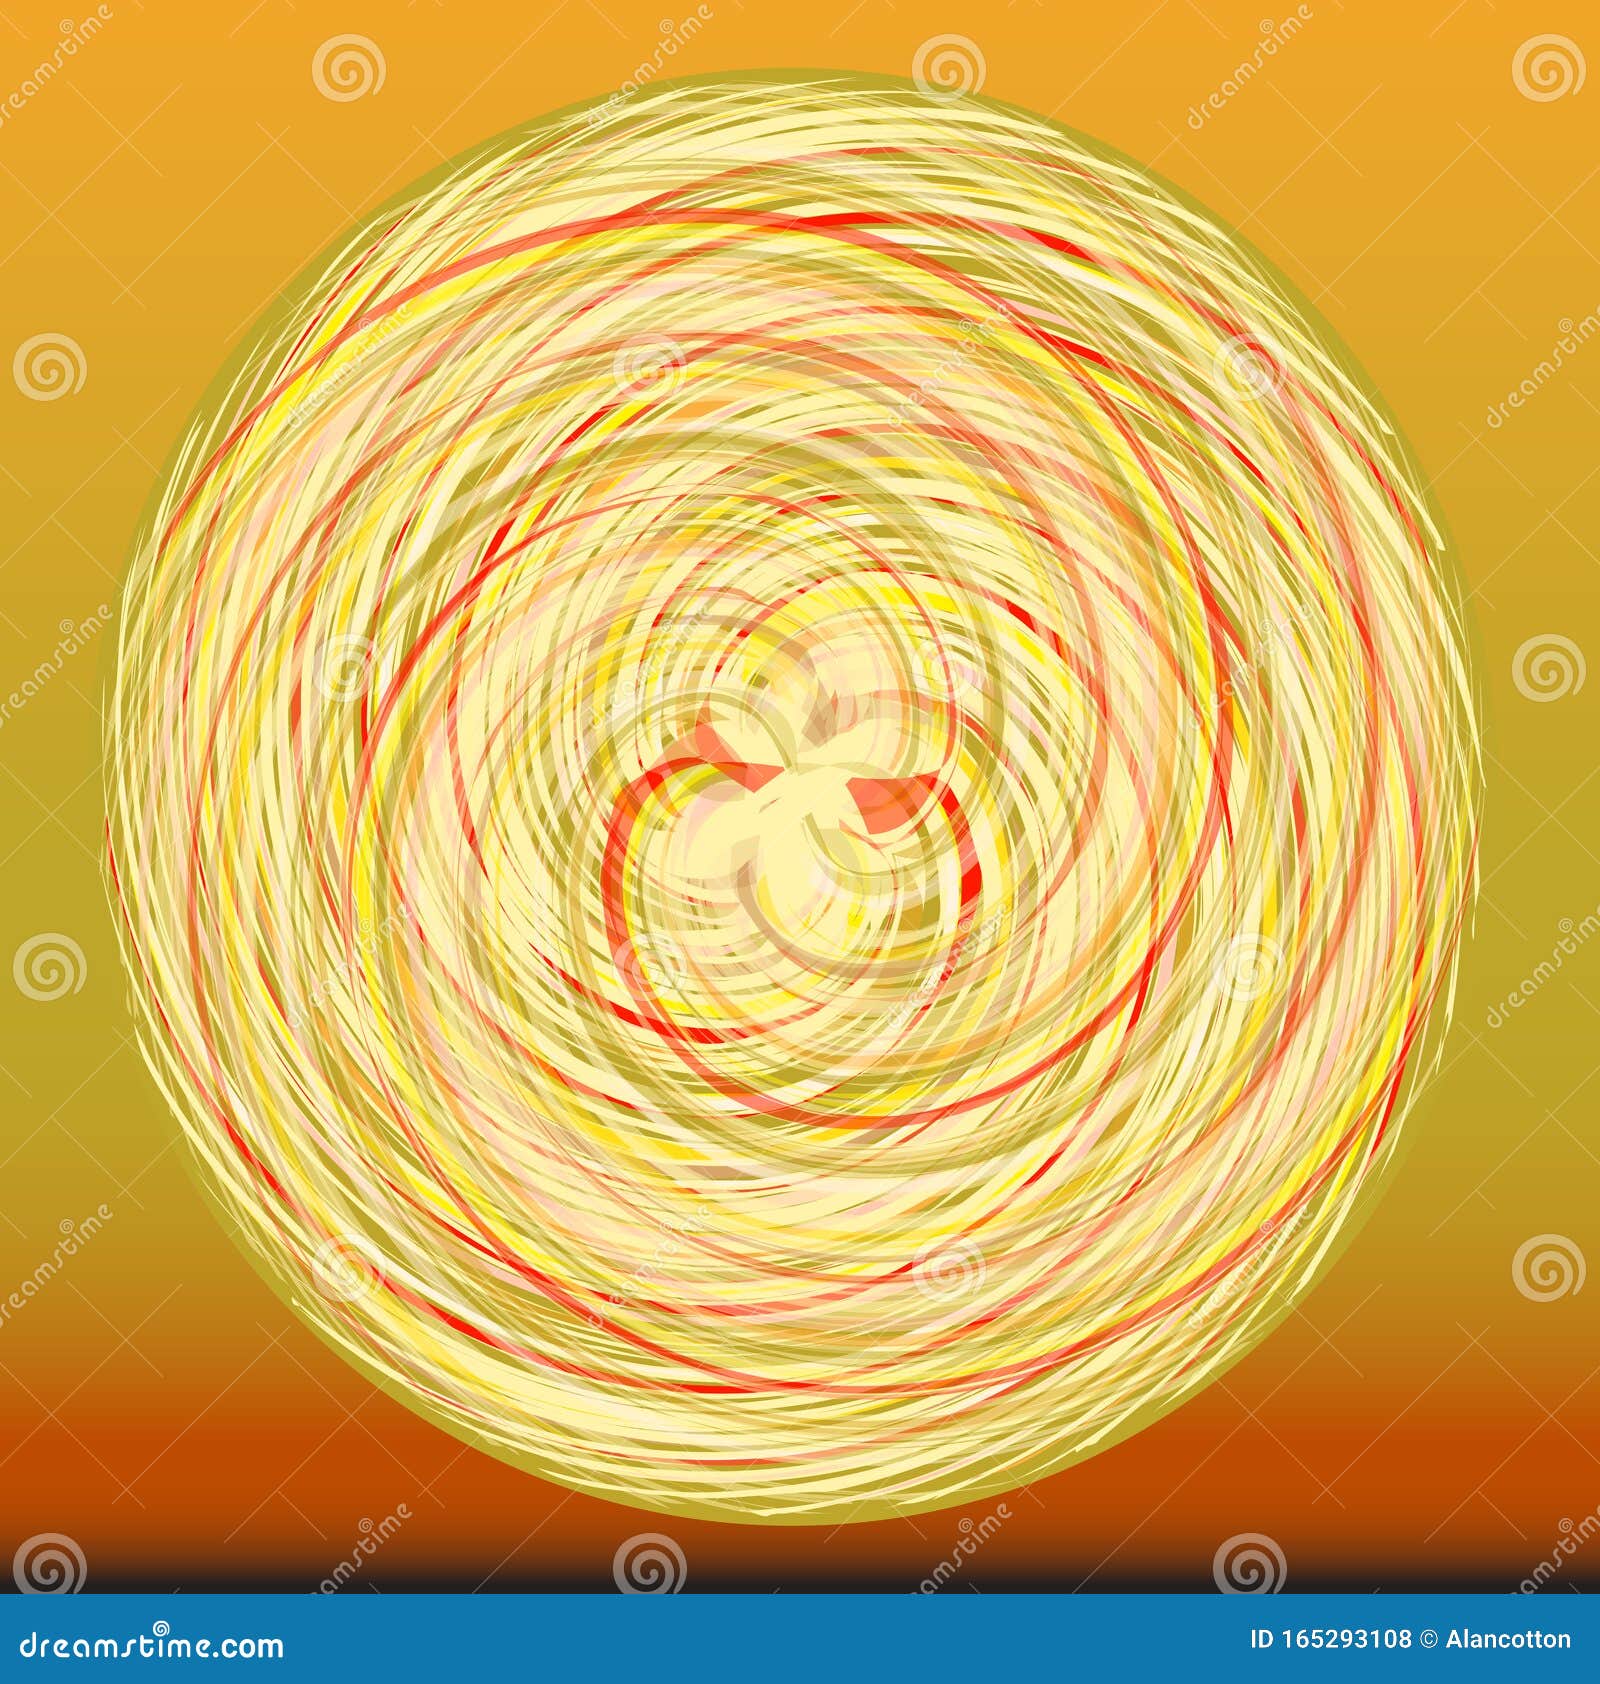 Round Bale Drawing Stock Illustrations 158 Round Bale Drawing Stock Illustrations Vectors Clipart Dreamstime